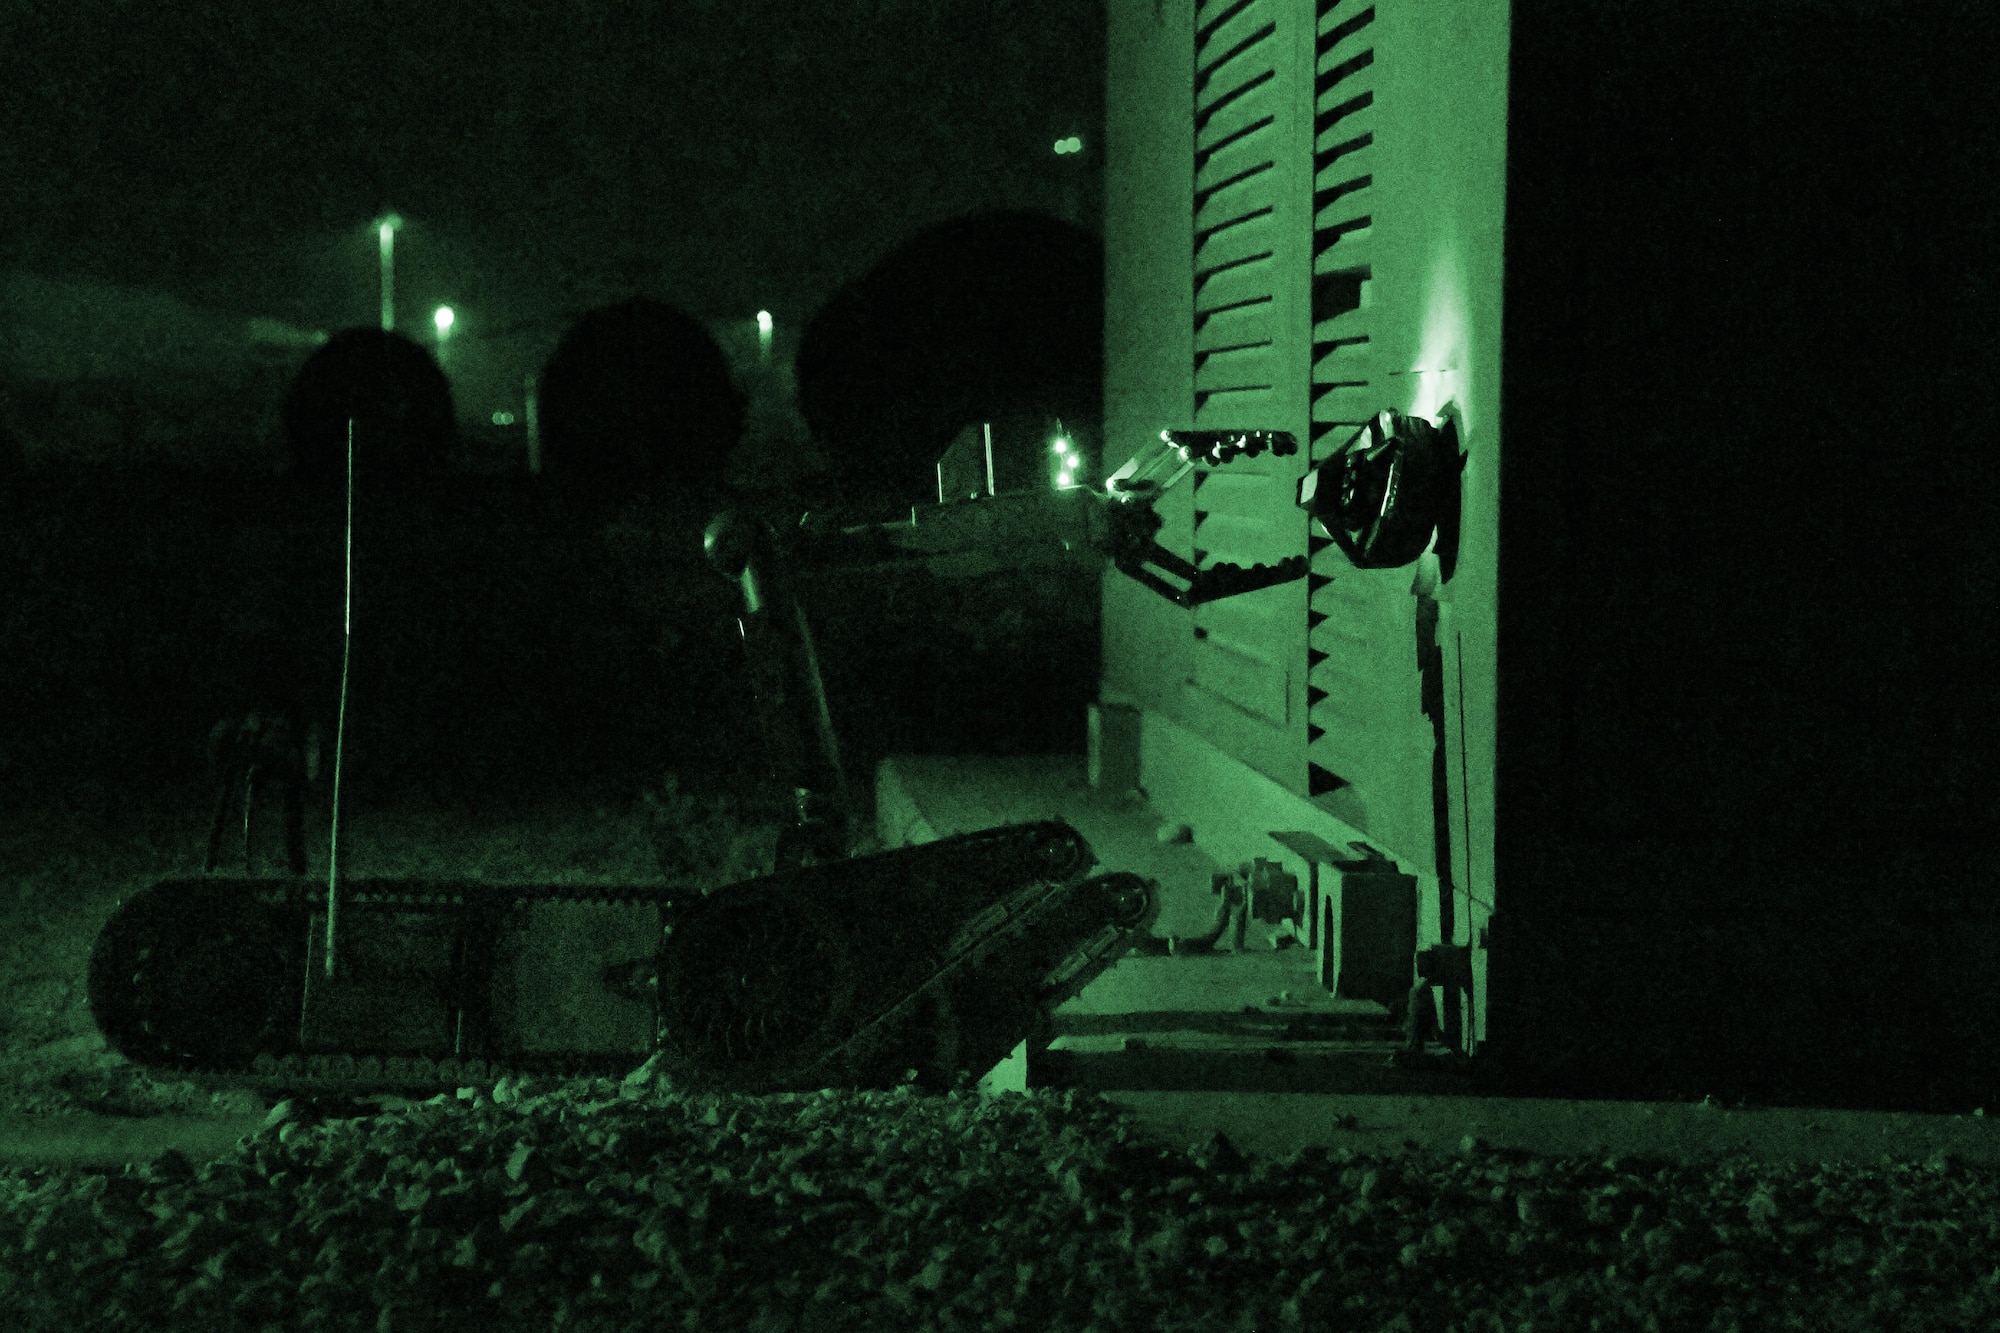 A PACBOT bomb disposal robot removes an improvised explosive device from a transformer during exercise “Vigilant Walrus” at Al Udeid Air Base, Qatar, March 21, 2017. During the exercise, Airmen with the 379th Expeditionary Civil Engineer Squadron Explosive Ordnance Disposal Flight were forced to work at night without the use of white light. (U.S. Air Force photo illustration by Senior Airman Miles Wilson)